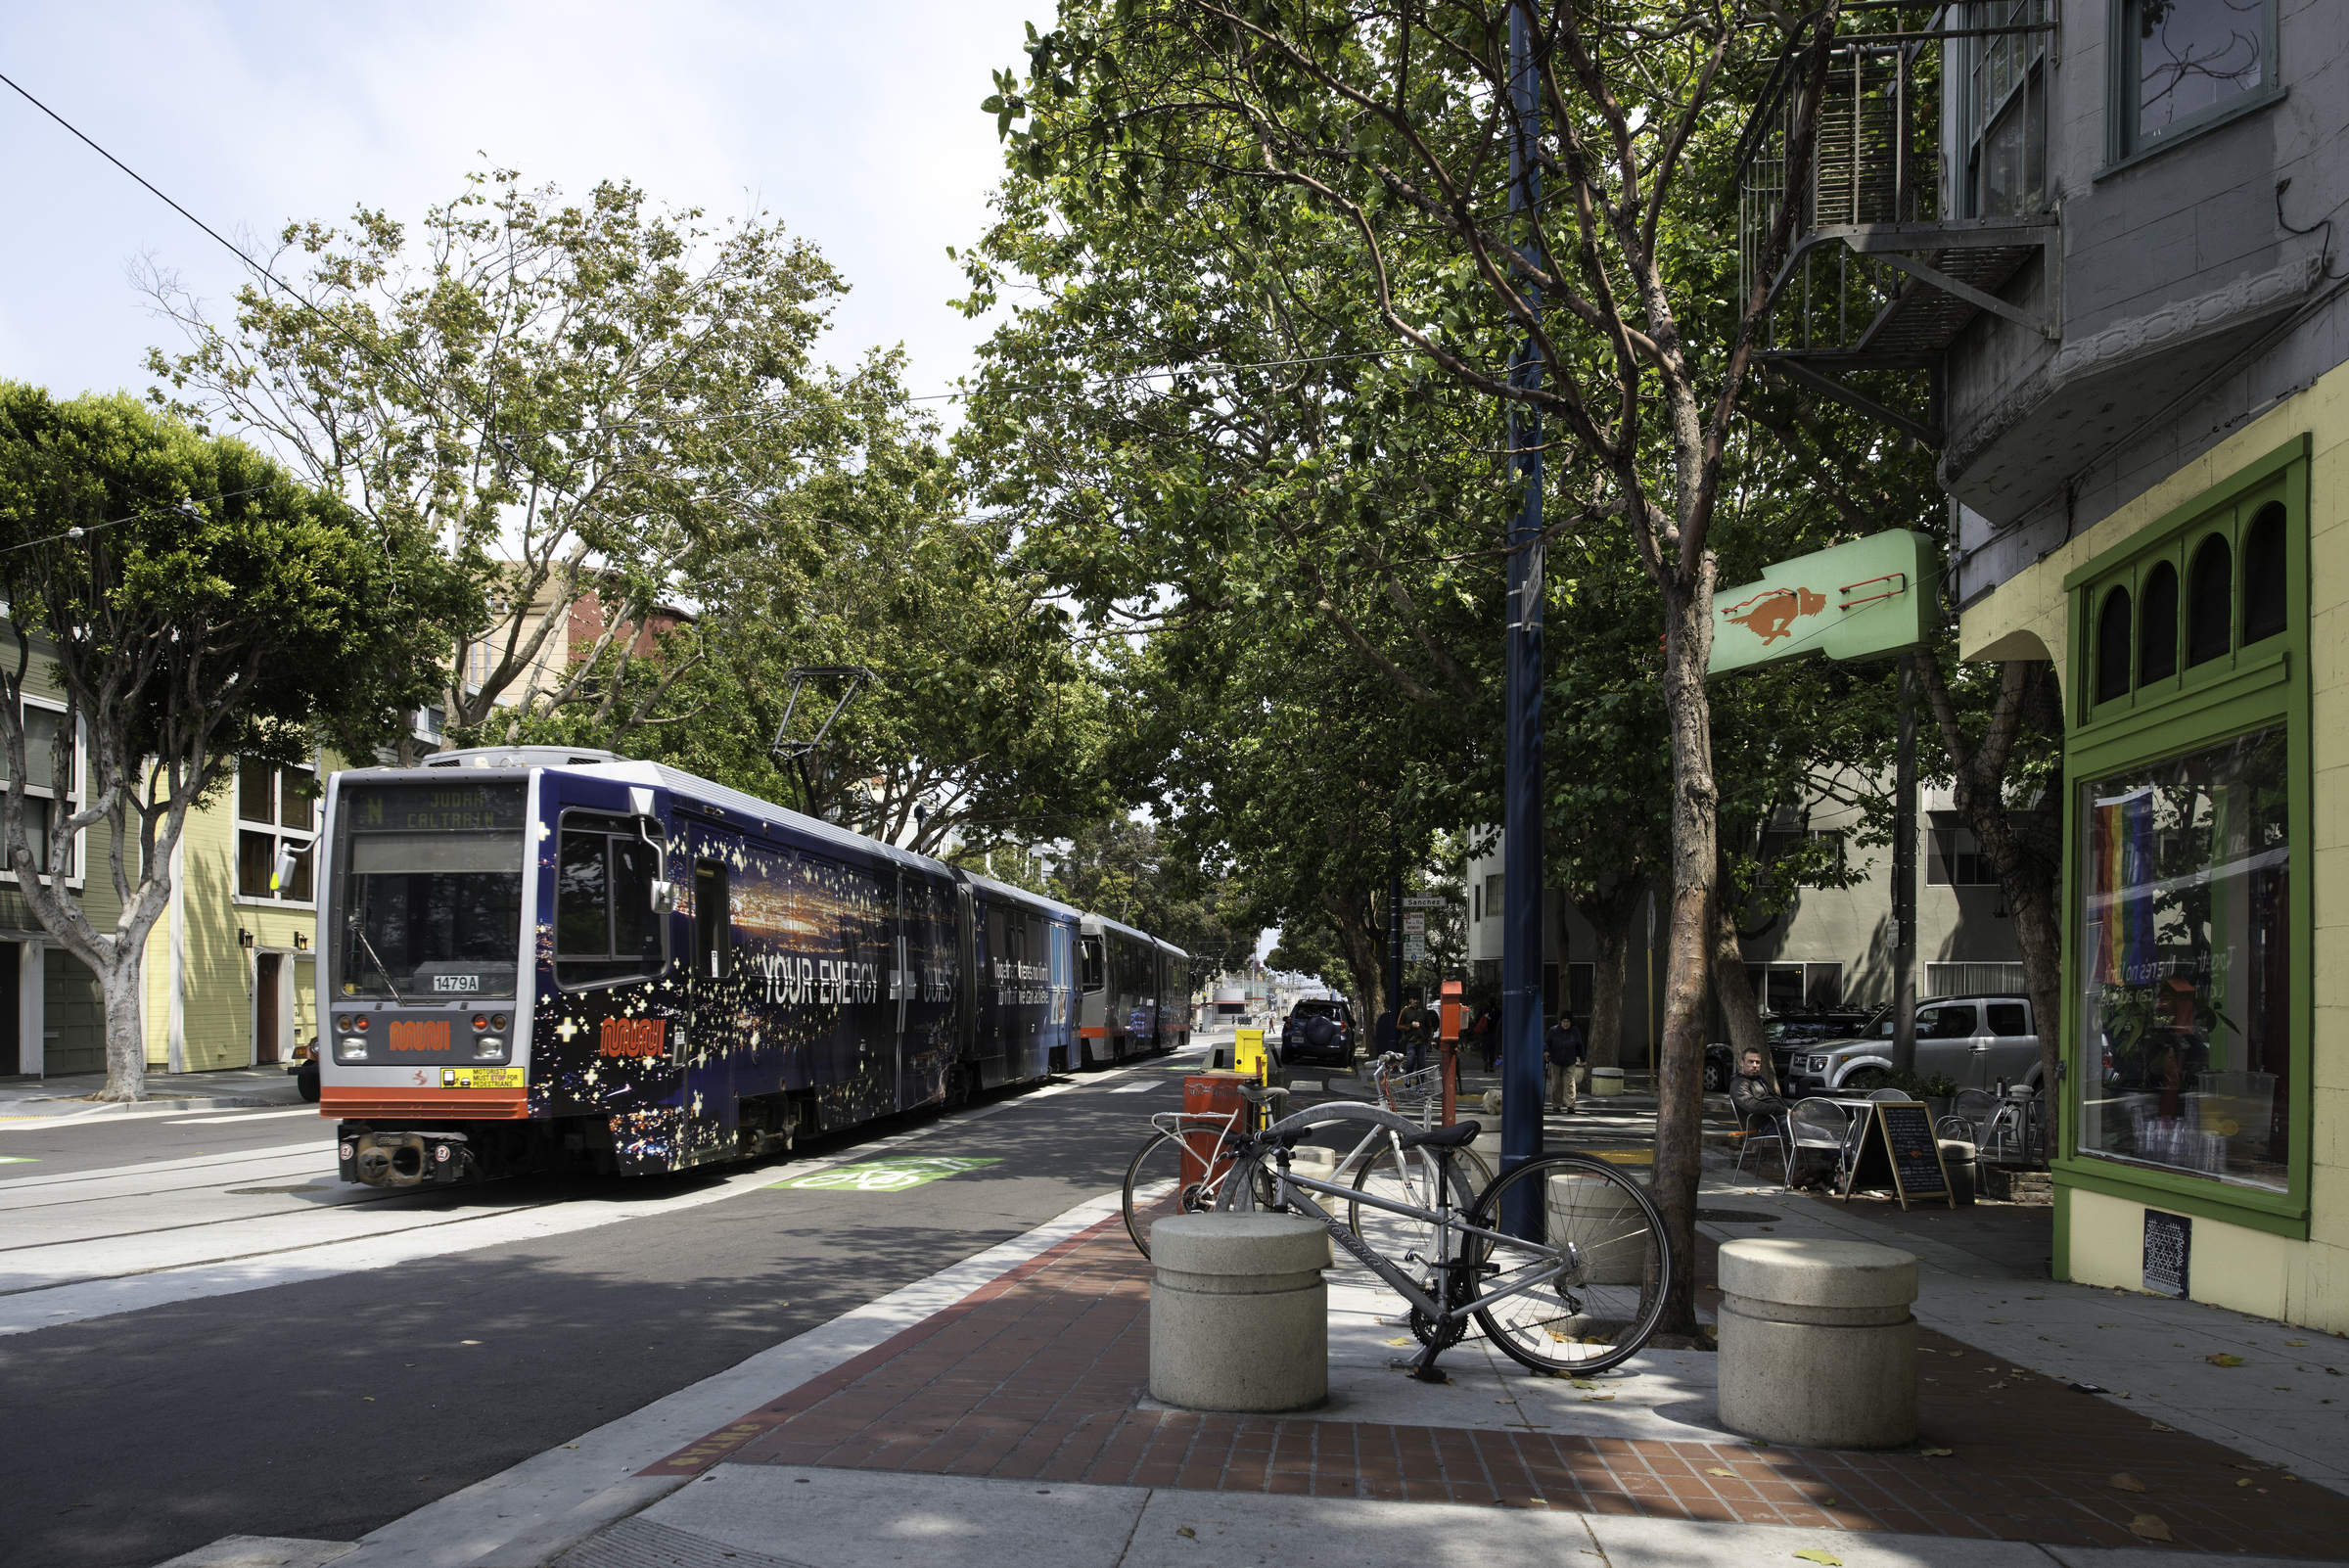 N Line light rail train with a dark blue advertising wrap travels east on a tree-lined Duboce Street past the Duboce Park Cafe. A bicycle is parked on the sidewalk. It and the street furniture are in the foreground.